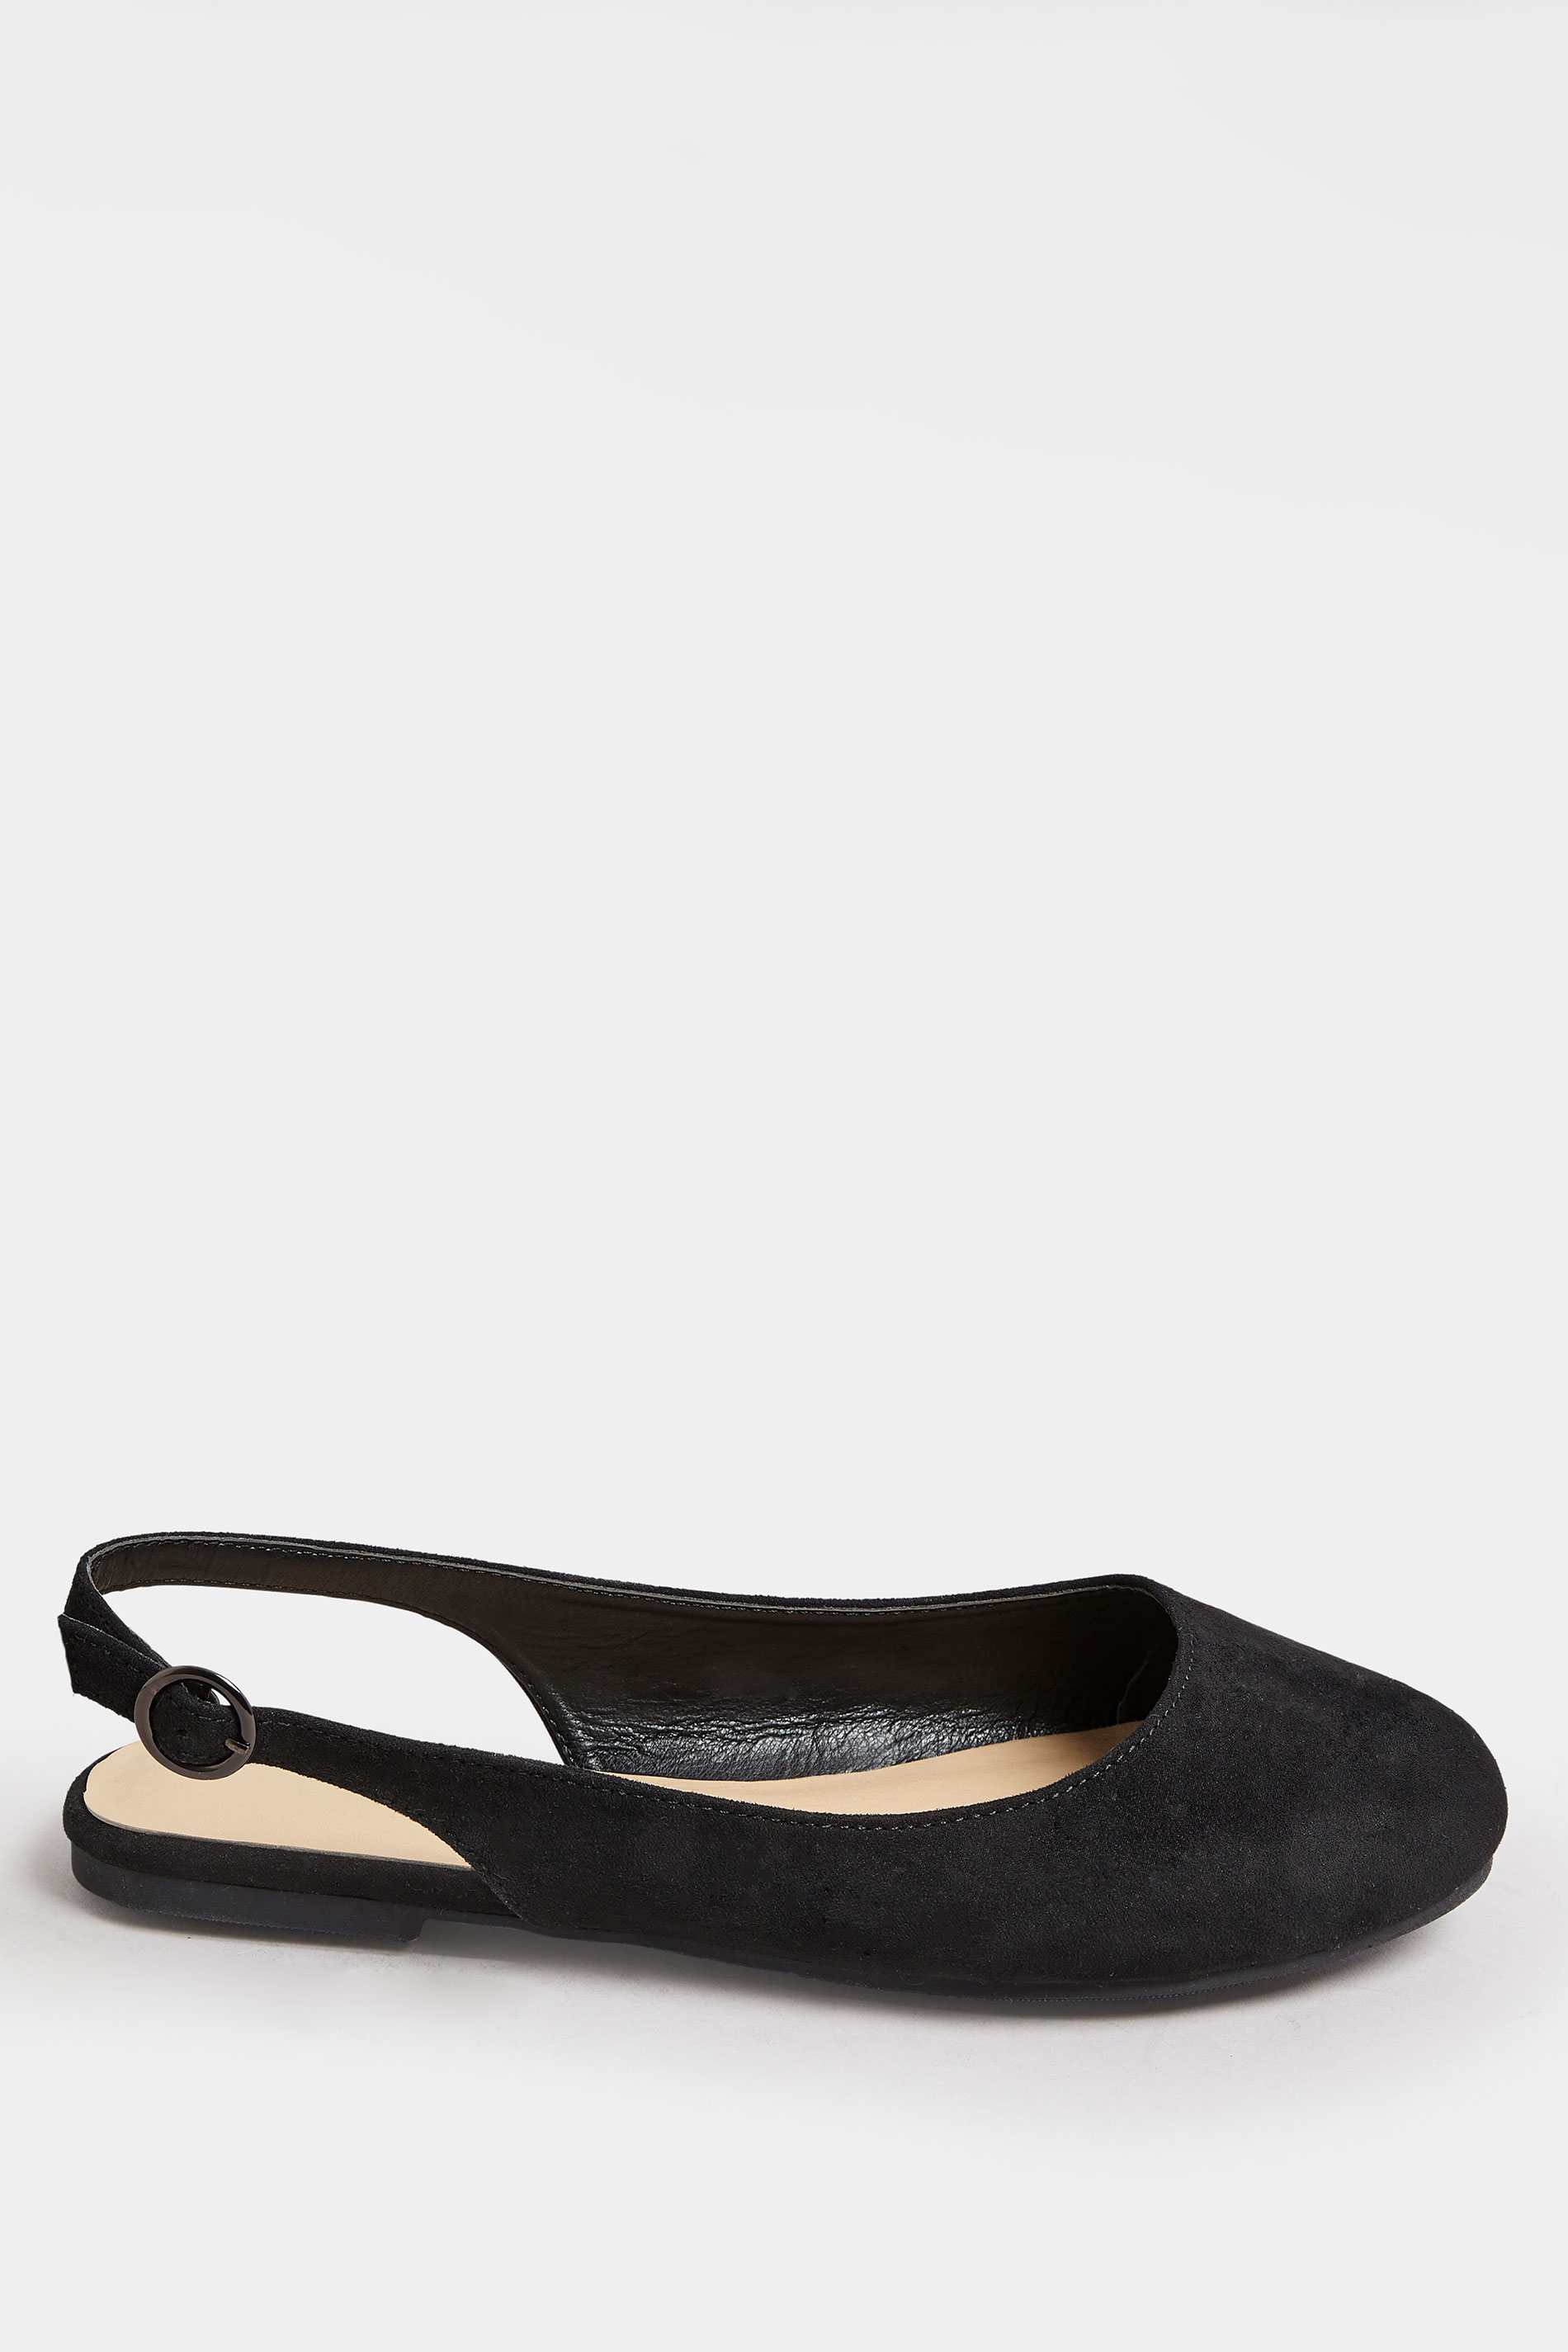 Black Faux Suede Slingback Pumps In Extra Wide EEE Fit | Yours Clothing 3